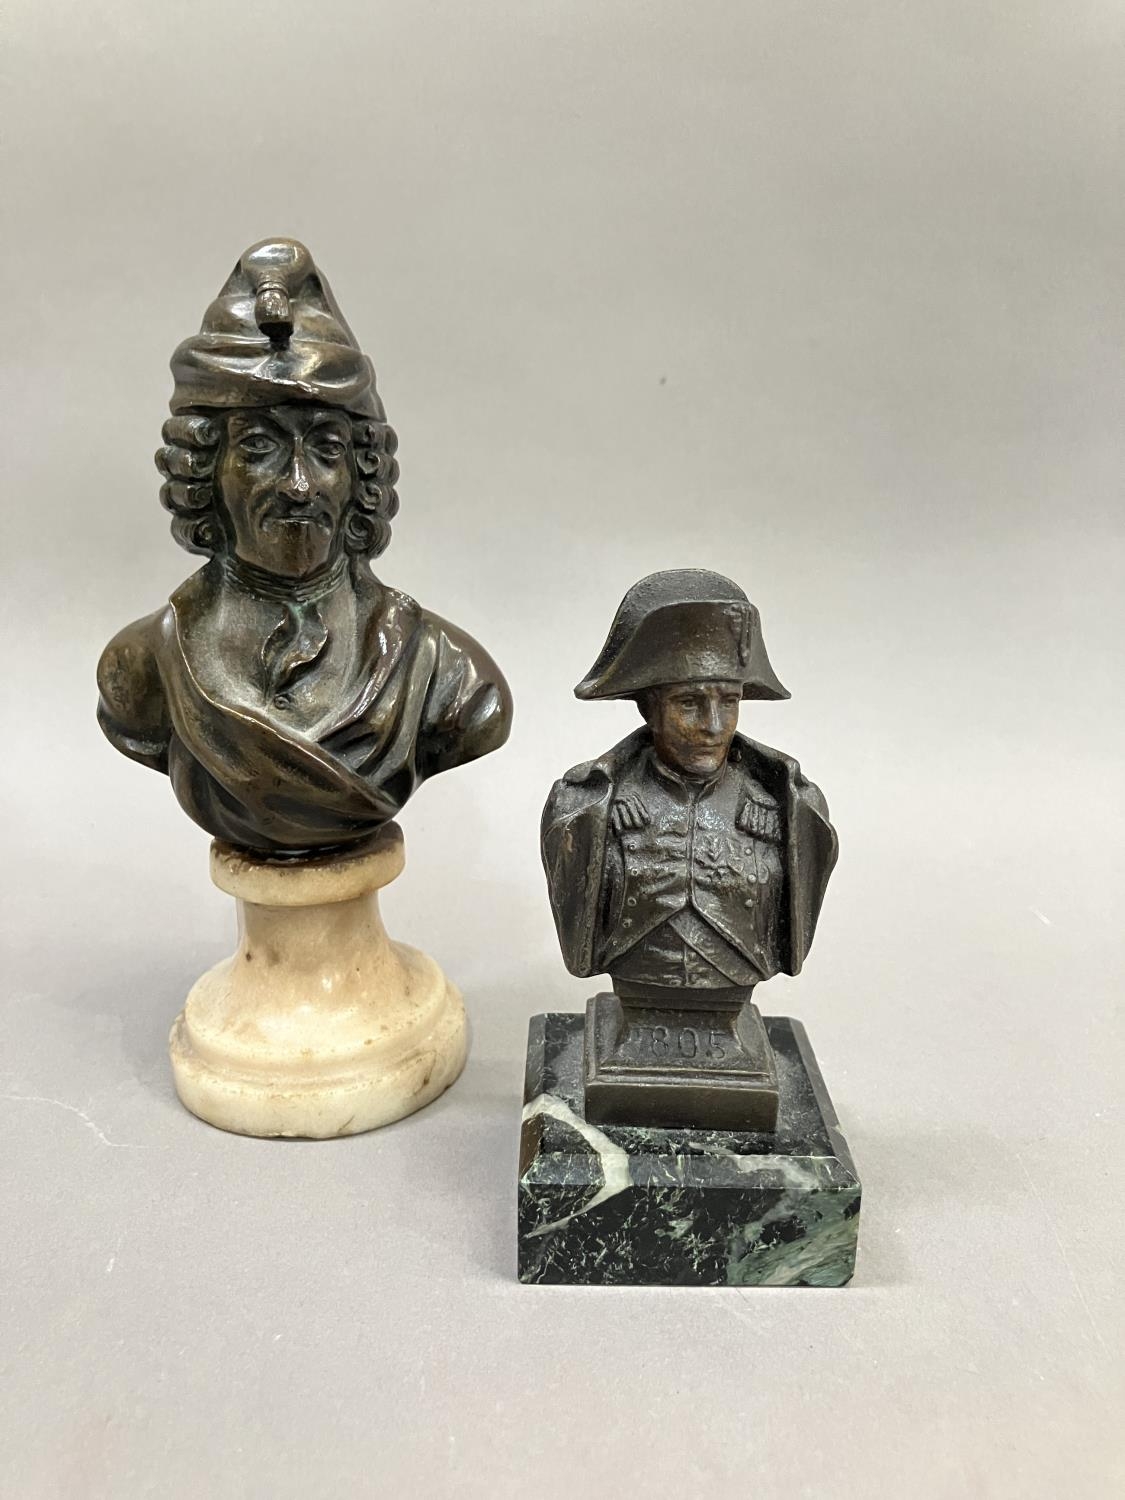 A bronze bust of Voltaire on a swept marble base, 15cm high together with a metal bust bust of